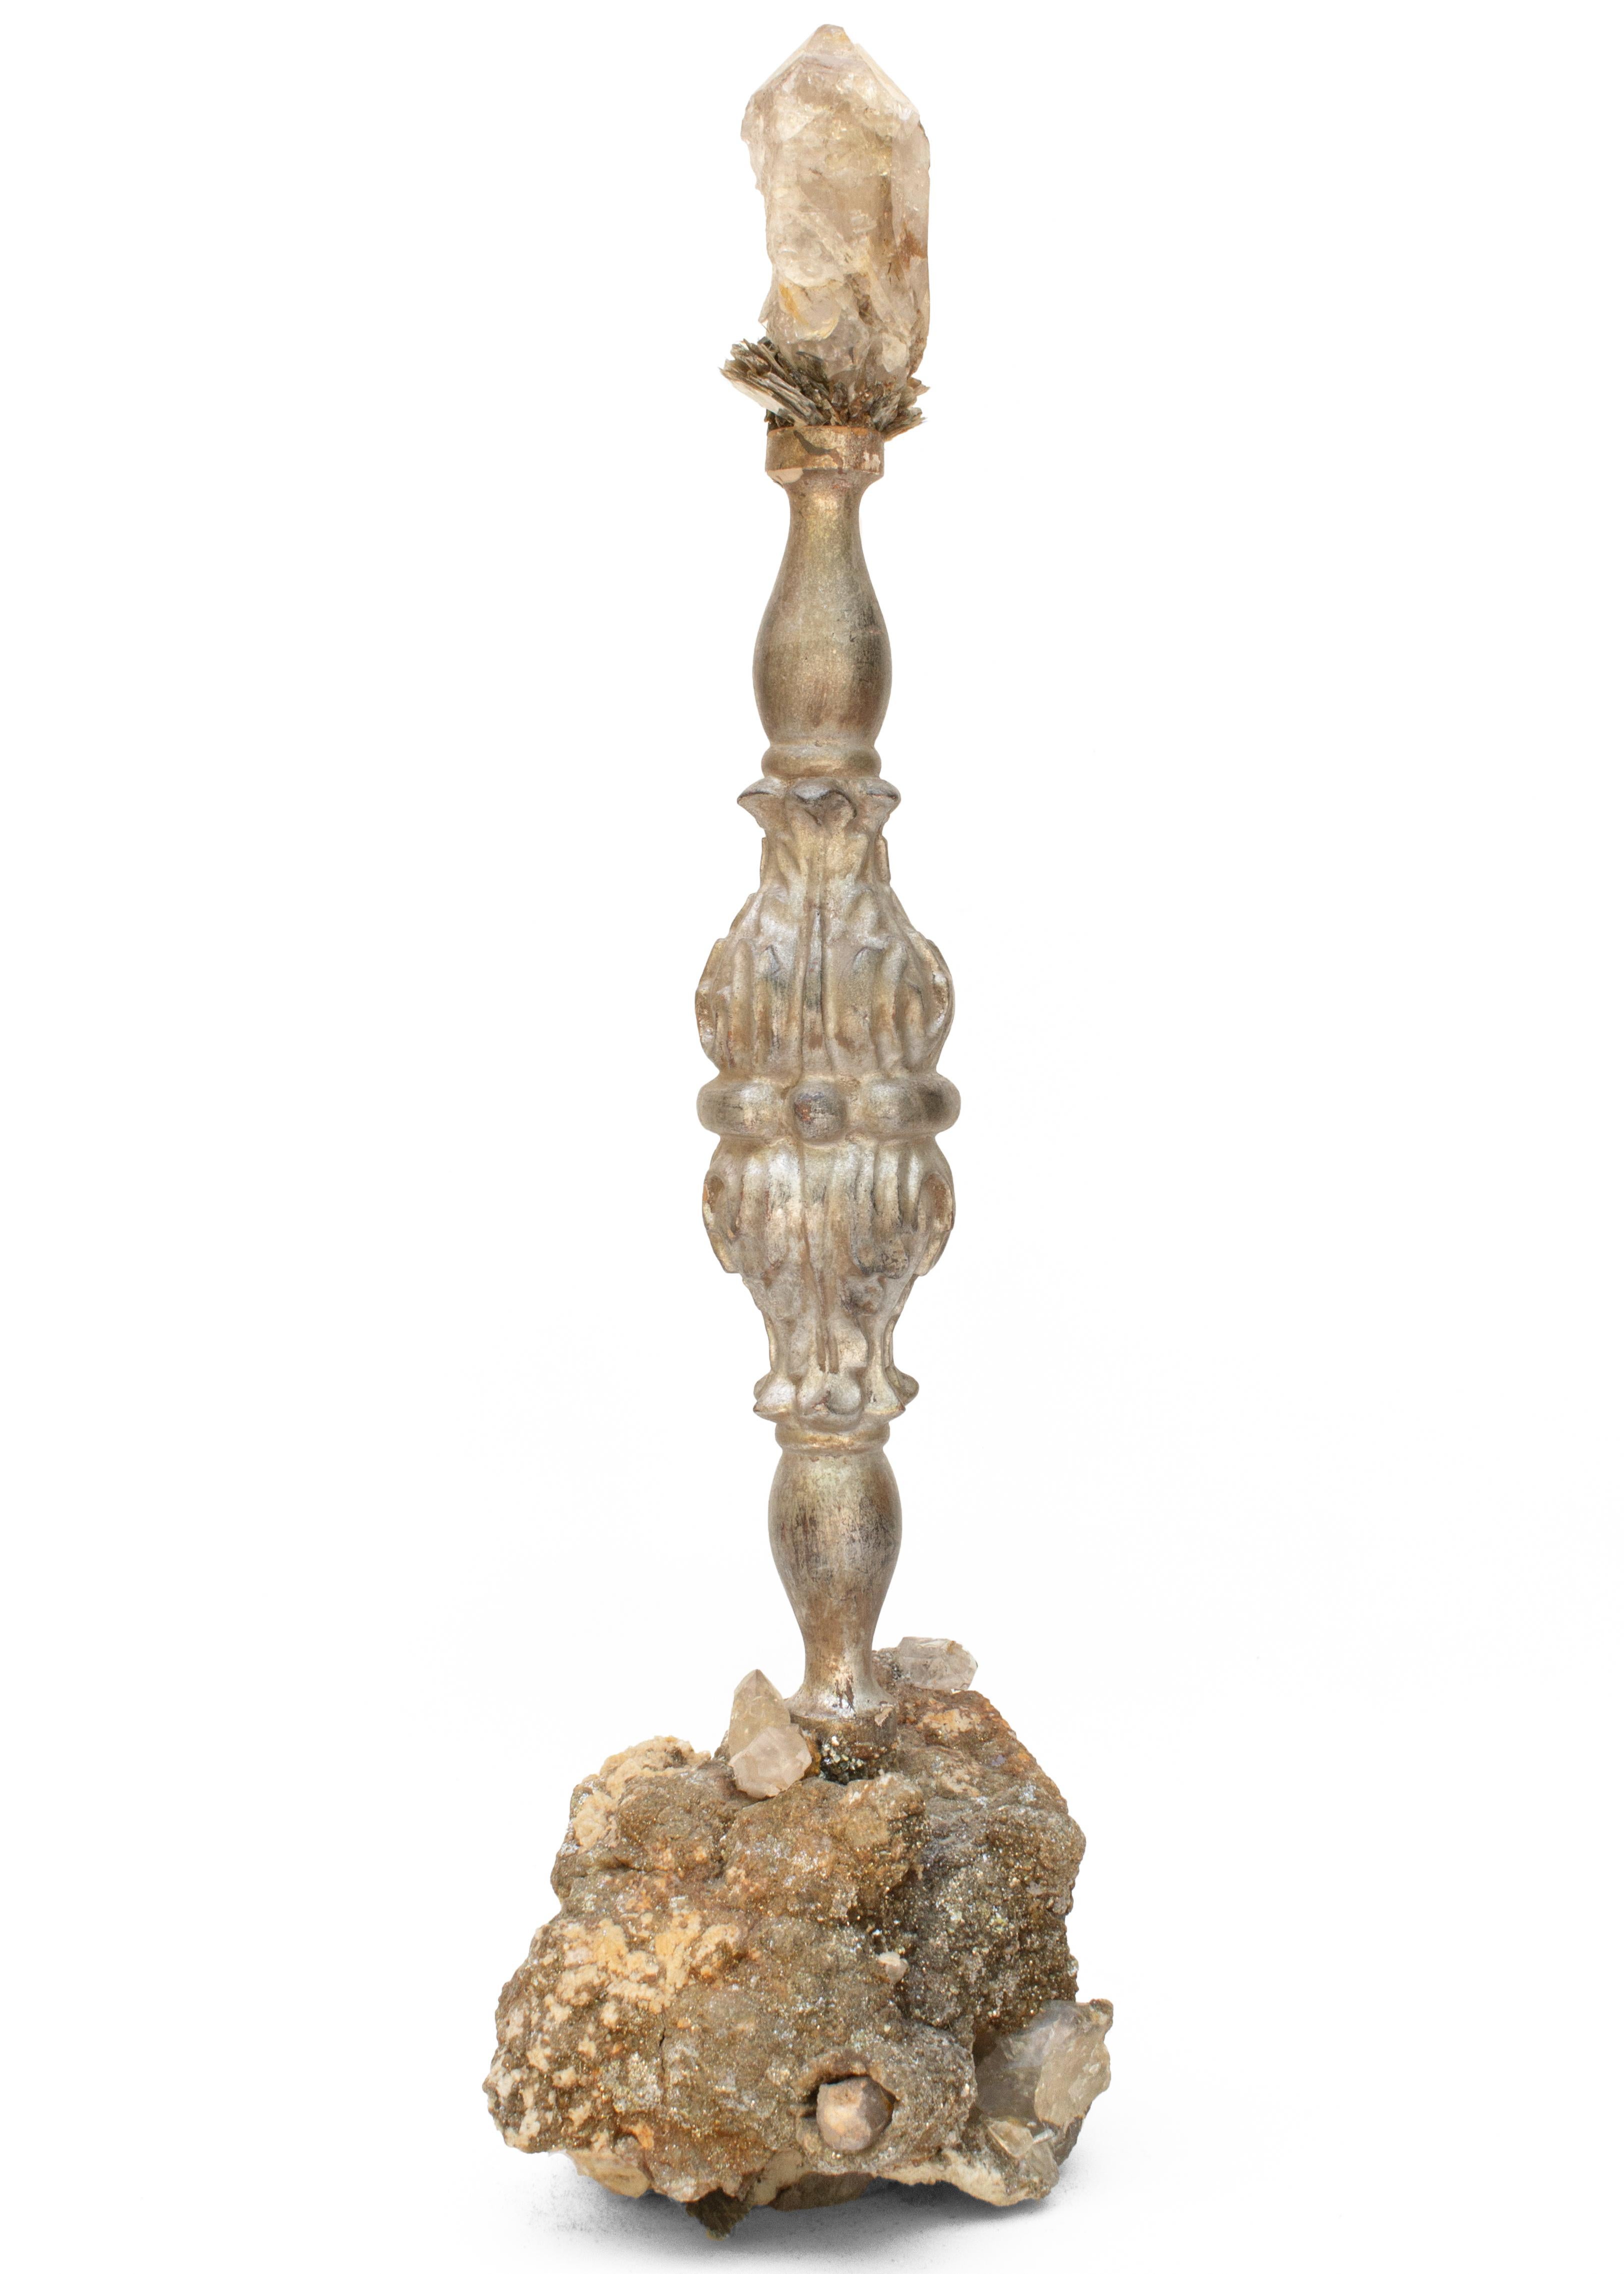 Crystal 18th Century Italian Silver Candlestick with Herkimer Diamond on Mica in Matrix